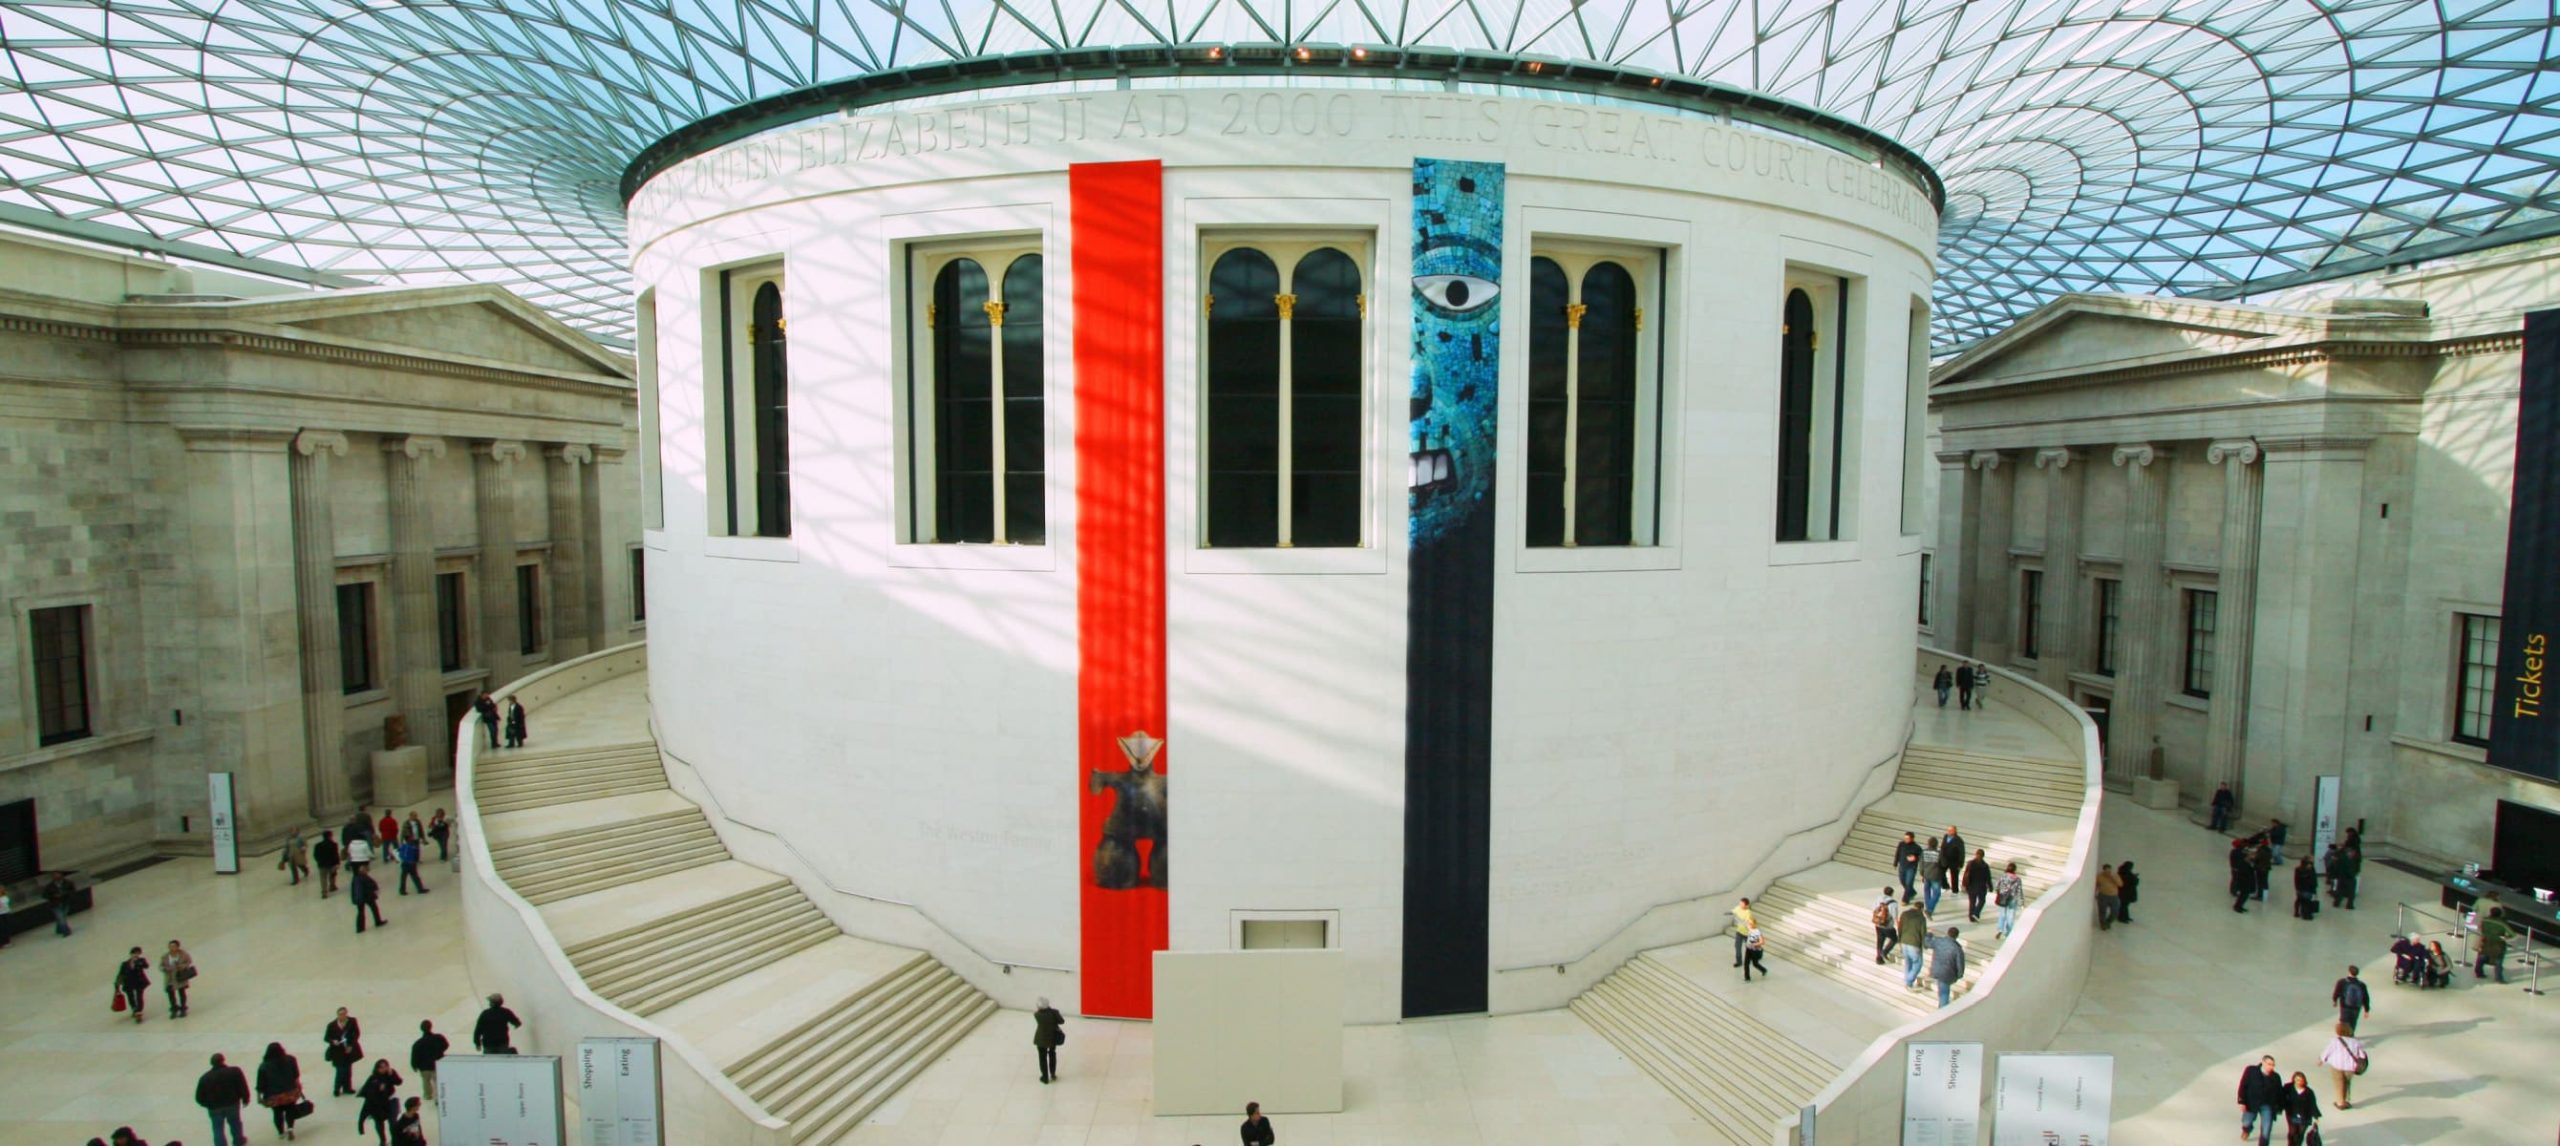 The Most Fascinating London Museums